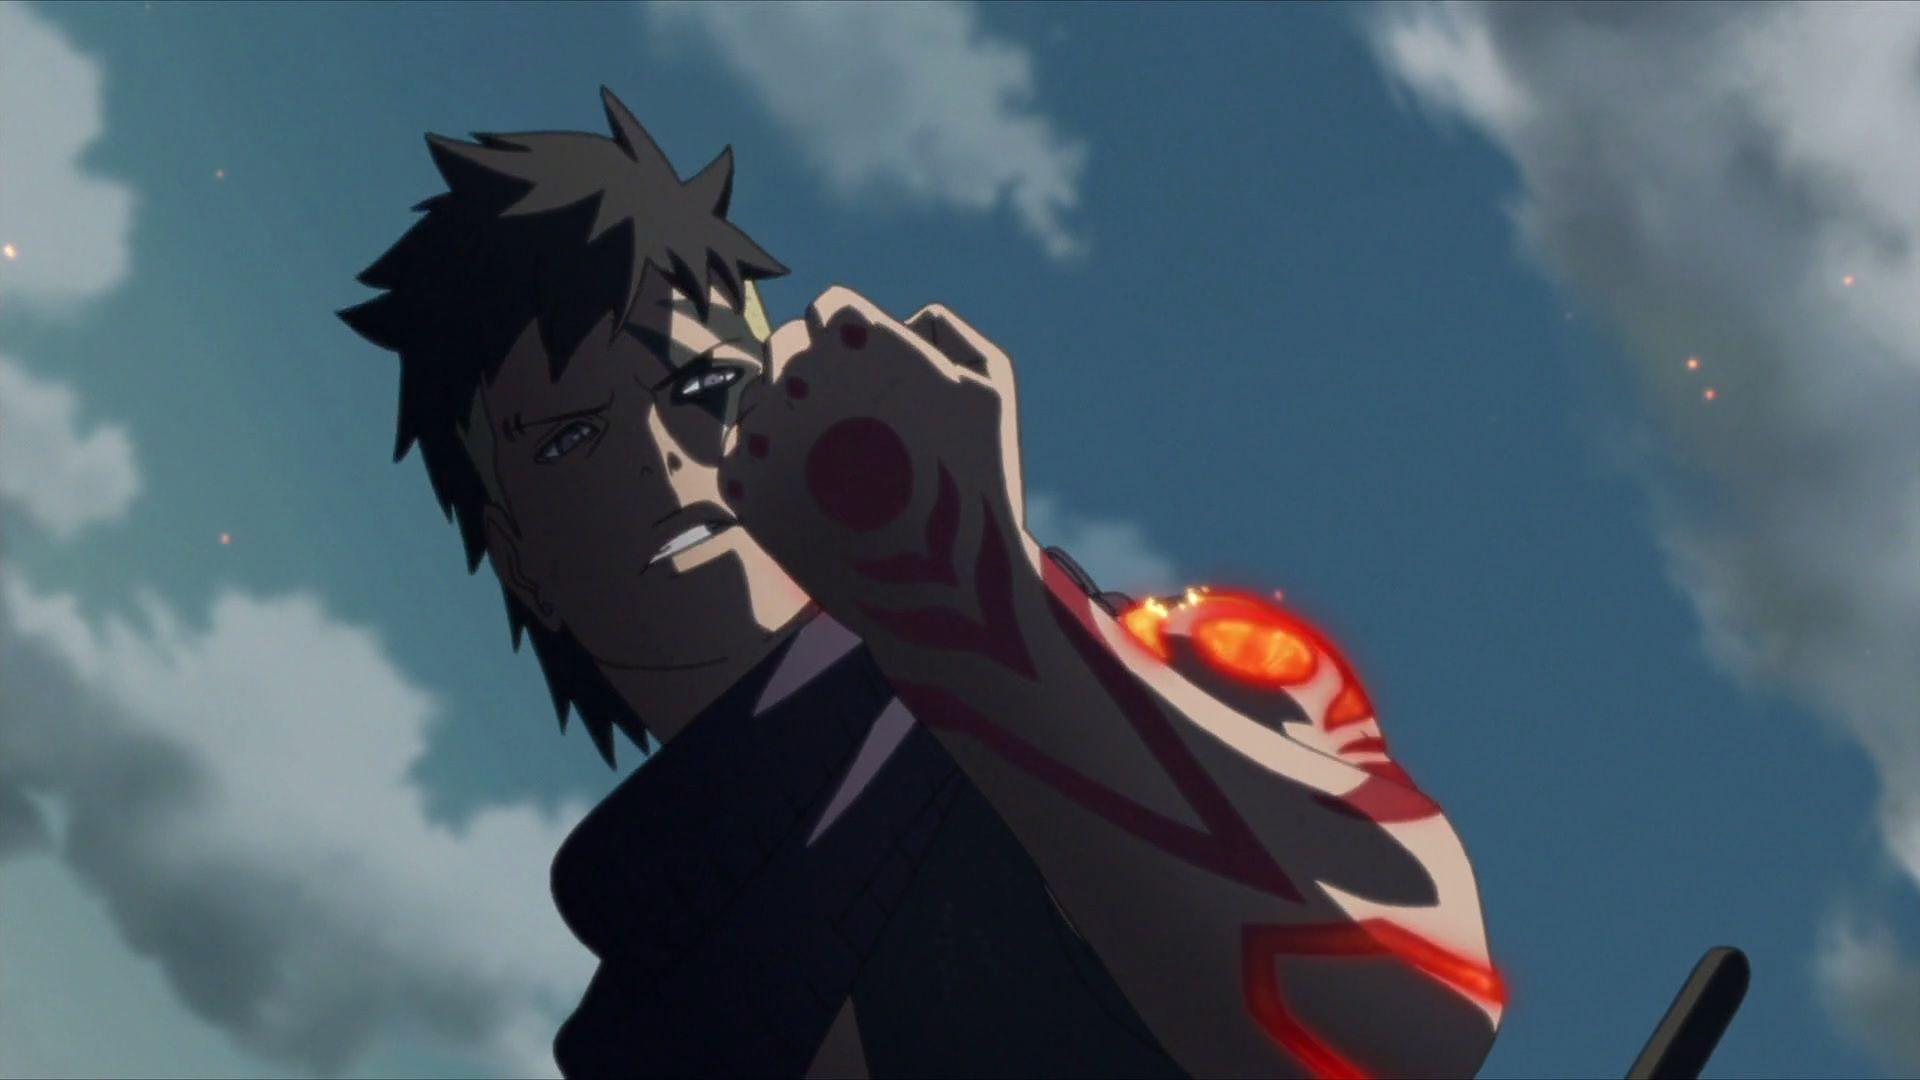 One Major Naruto Character Is Going To Die? It's Not Naruto